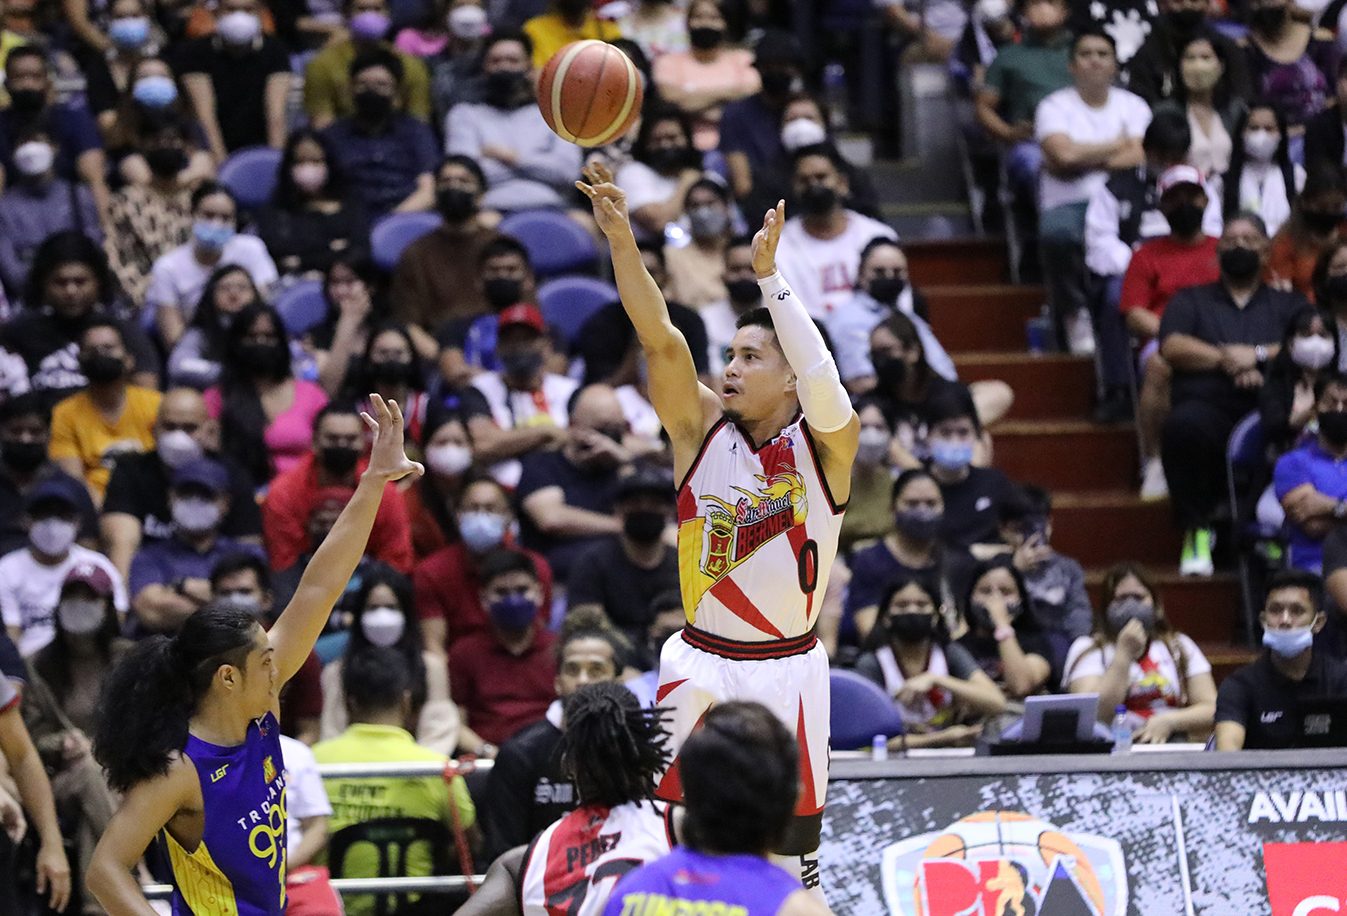 Chasing maiden PBA title, Enciso sets off timely explosion as San Miguel stays alive